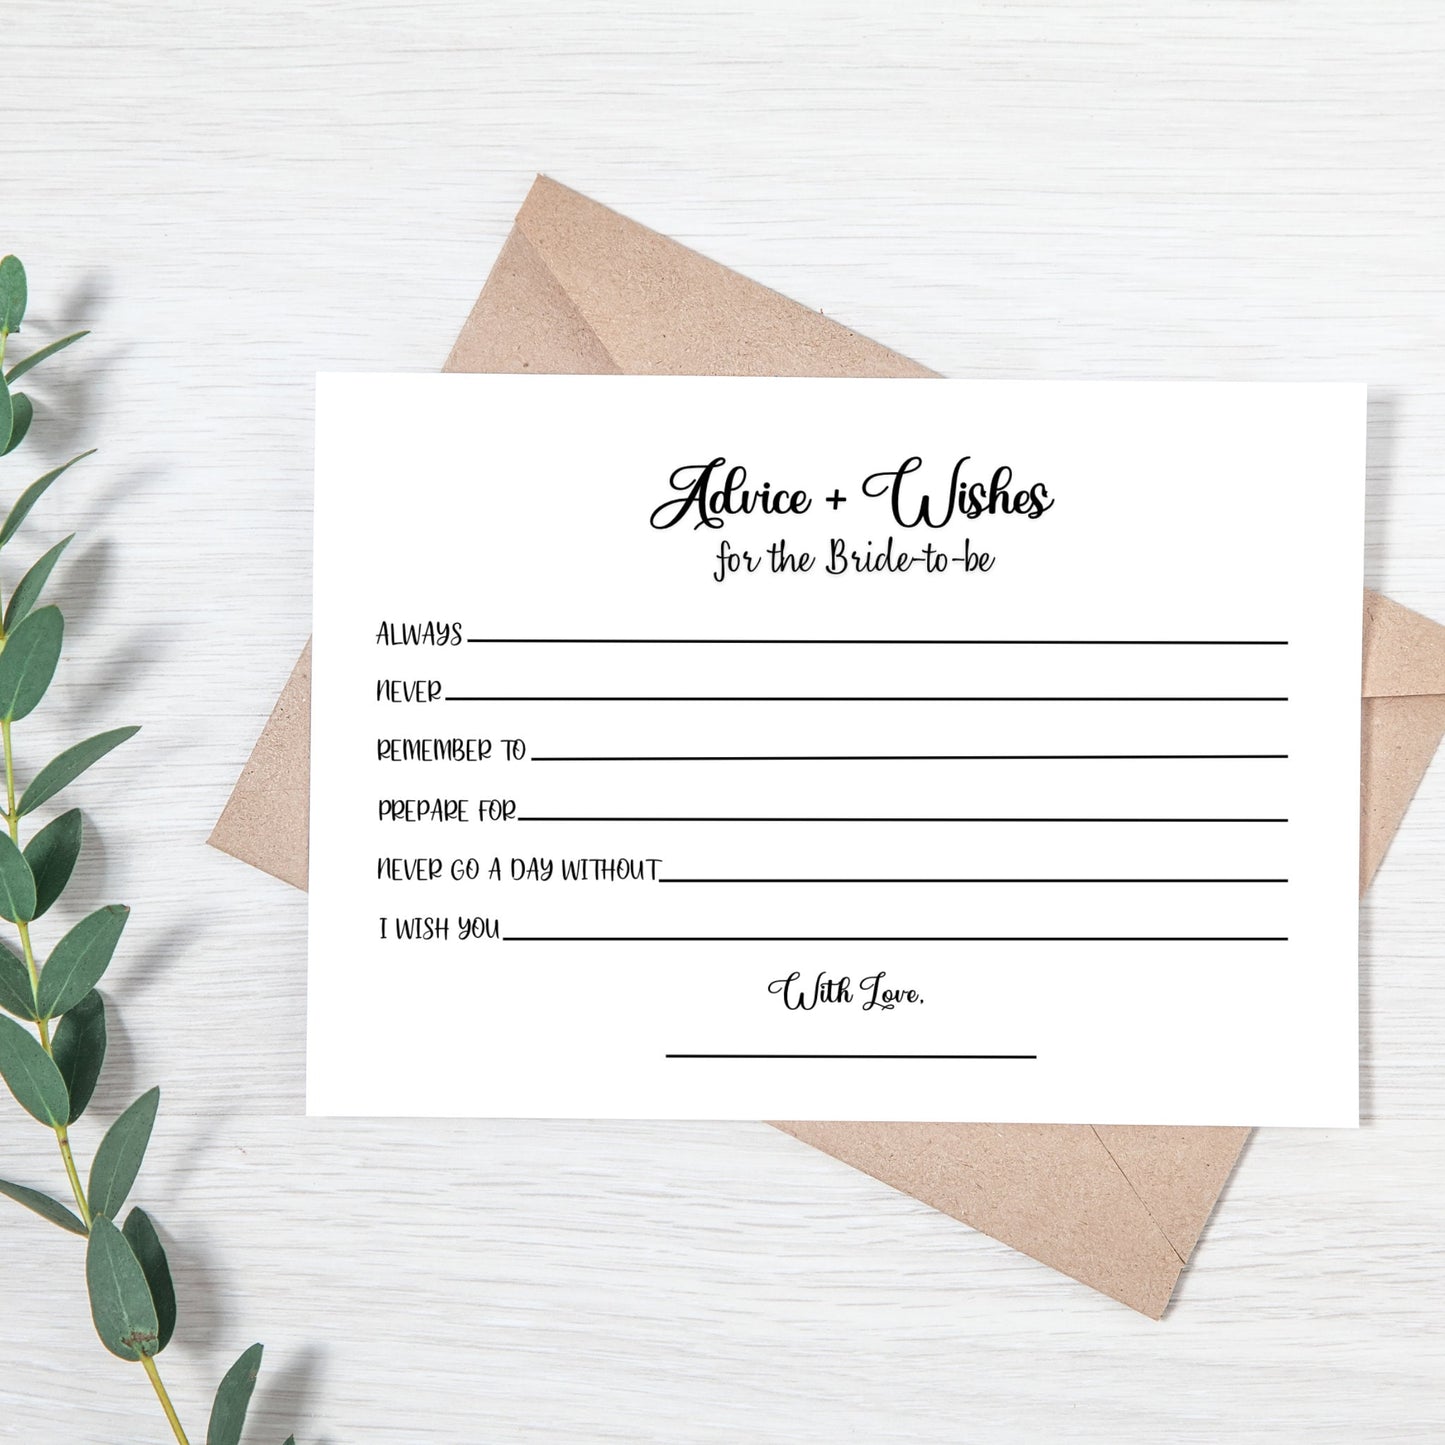 Bridal Shower Advice and Wishes Card Printable, Favorite Memory With the Bride, Minimalist Wedding Shower Party Games, Wedding Advice Card